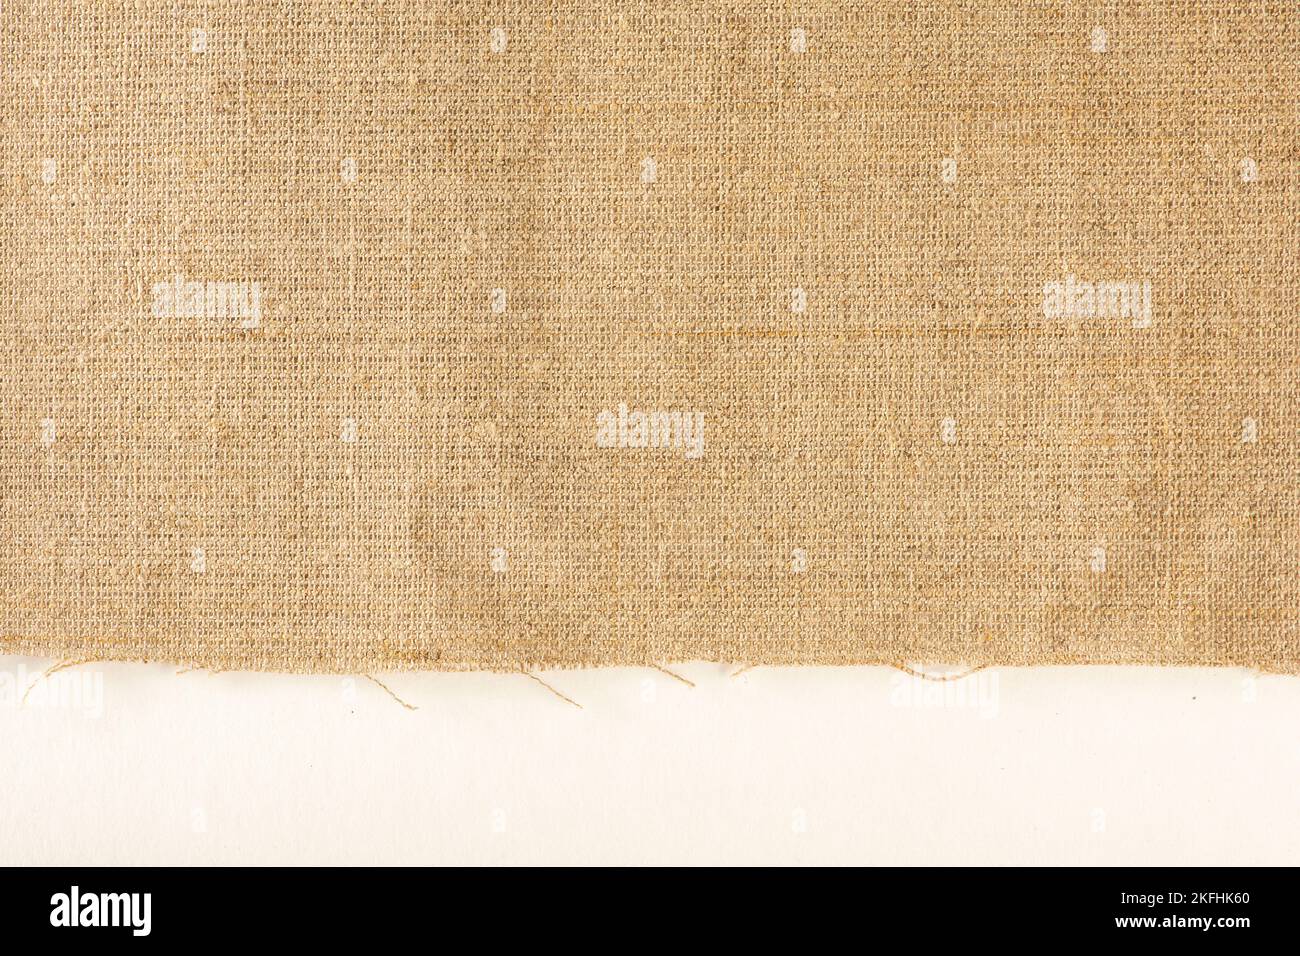 https://c8.alamy.com/comp/2KFHK60/texture-of-linen-fabric-natural-linen-fabric-with-a-raw-edge-on-a-white-background-2KFHK60.jpg